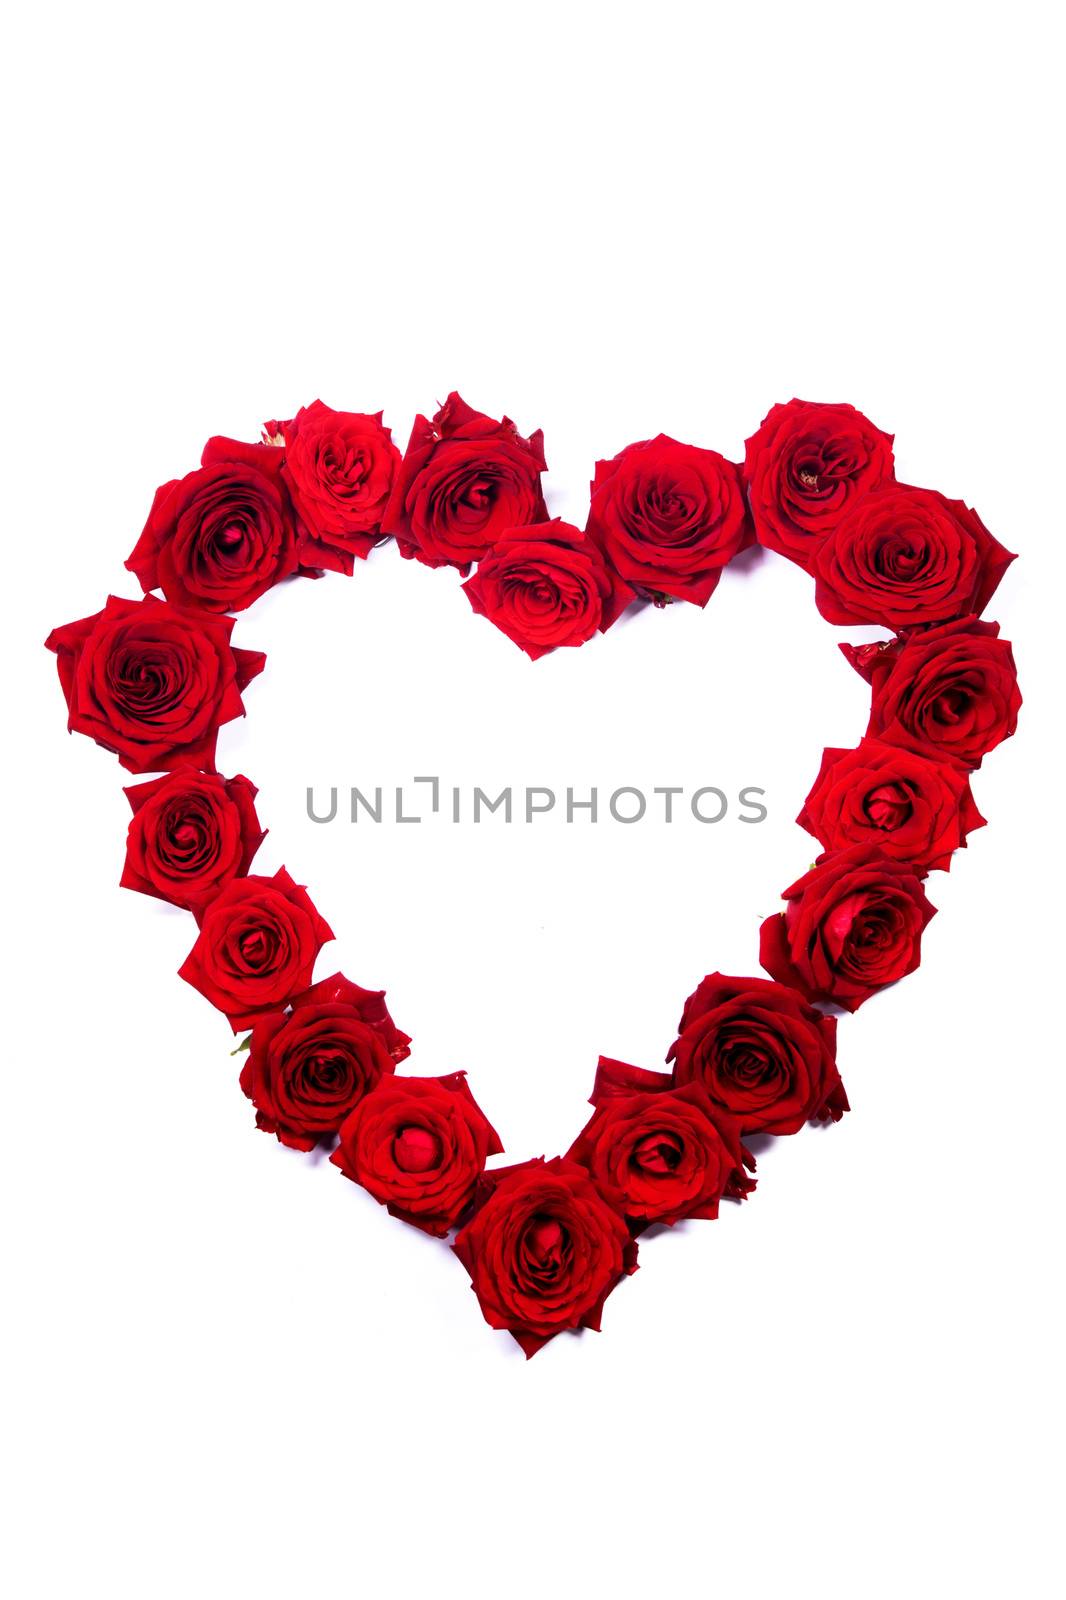 Red roses border frame in heart shape isolated on white background, Valentine's Day